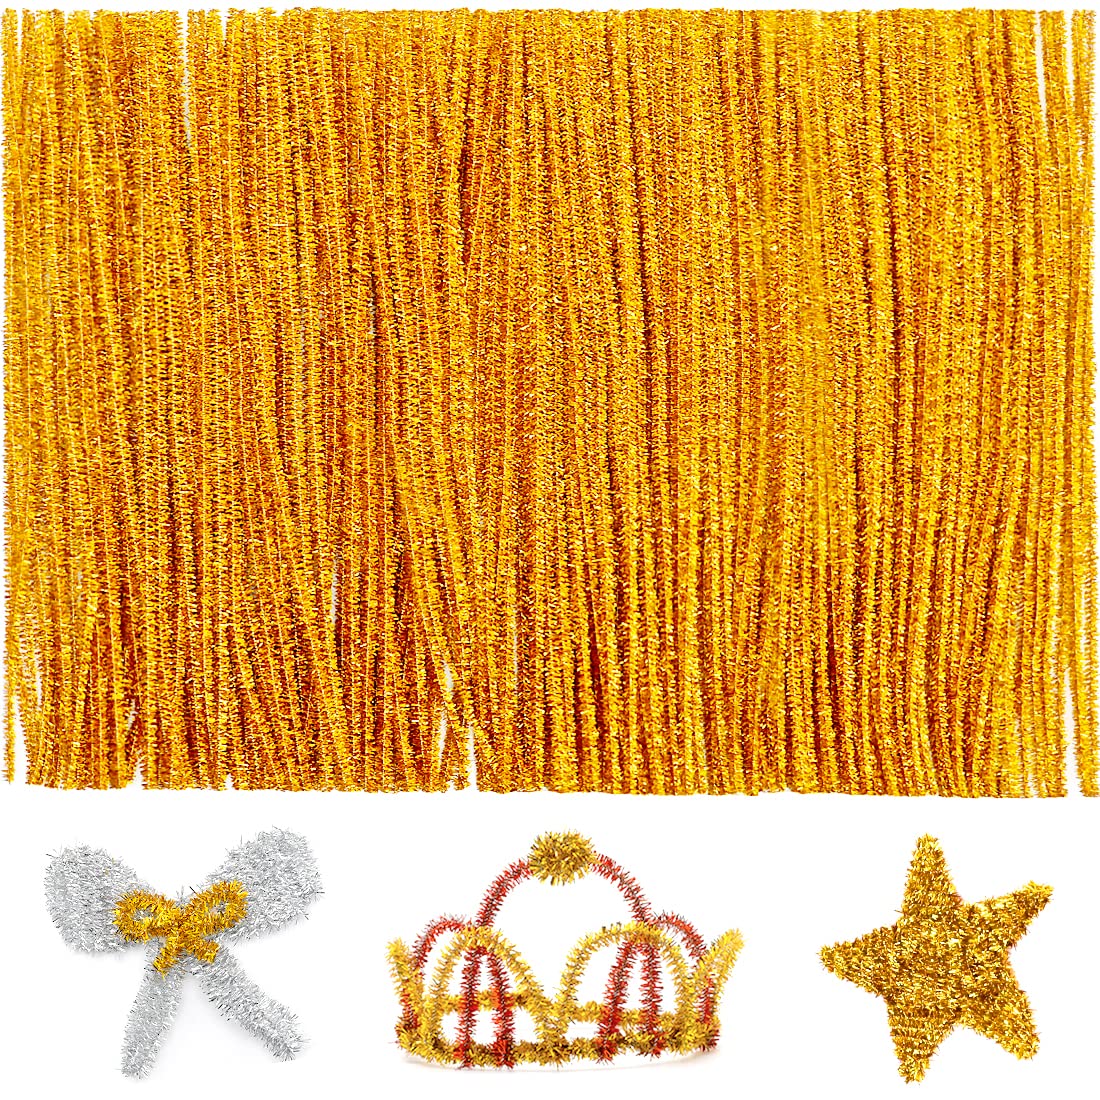 IOOLEEM Iooleem 200pcs Golden Glitter Pipe Cleaners, Glitter Chenille  Stems, Pipe Cleaners for Crafts, Pipe Cleaner Crafts, Art and Craf